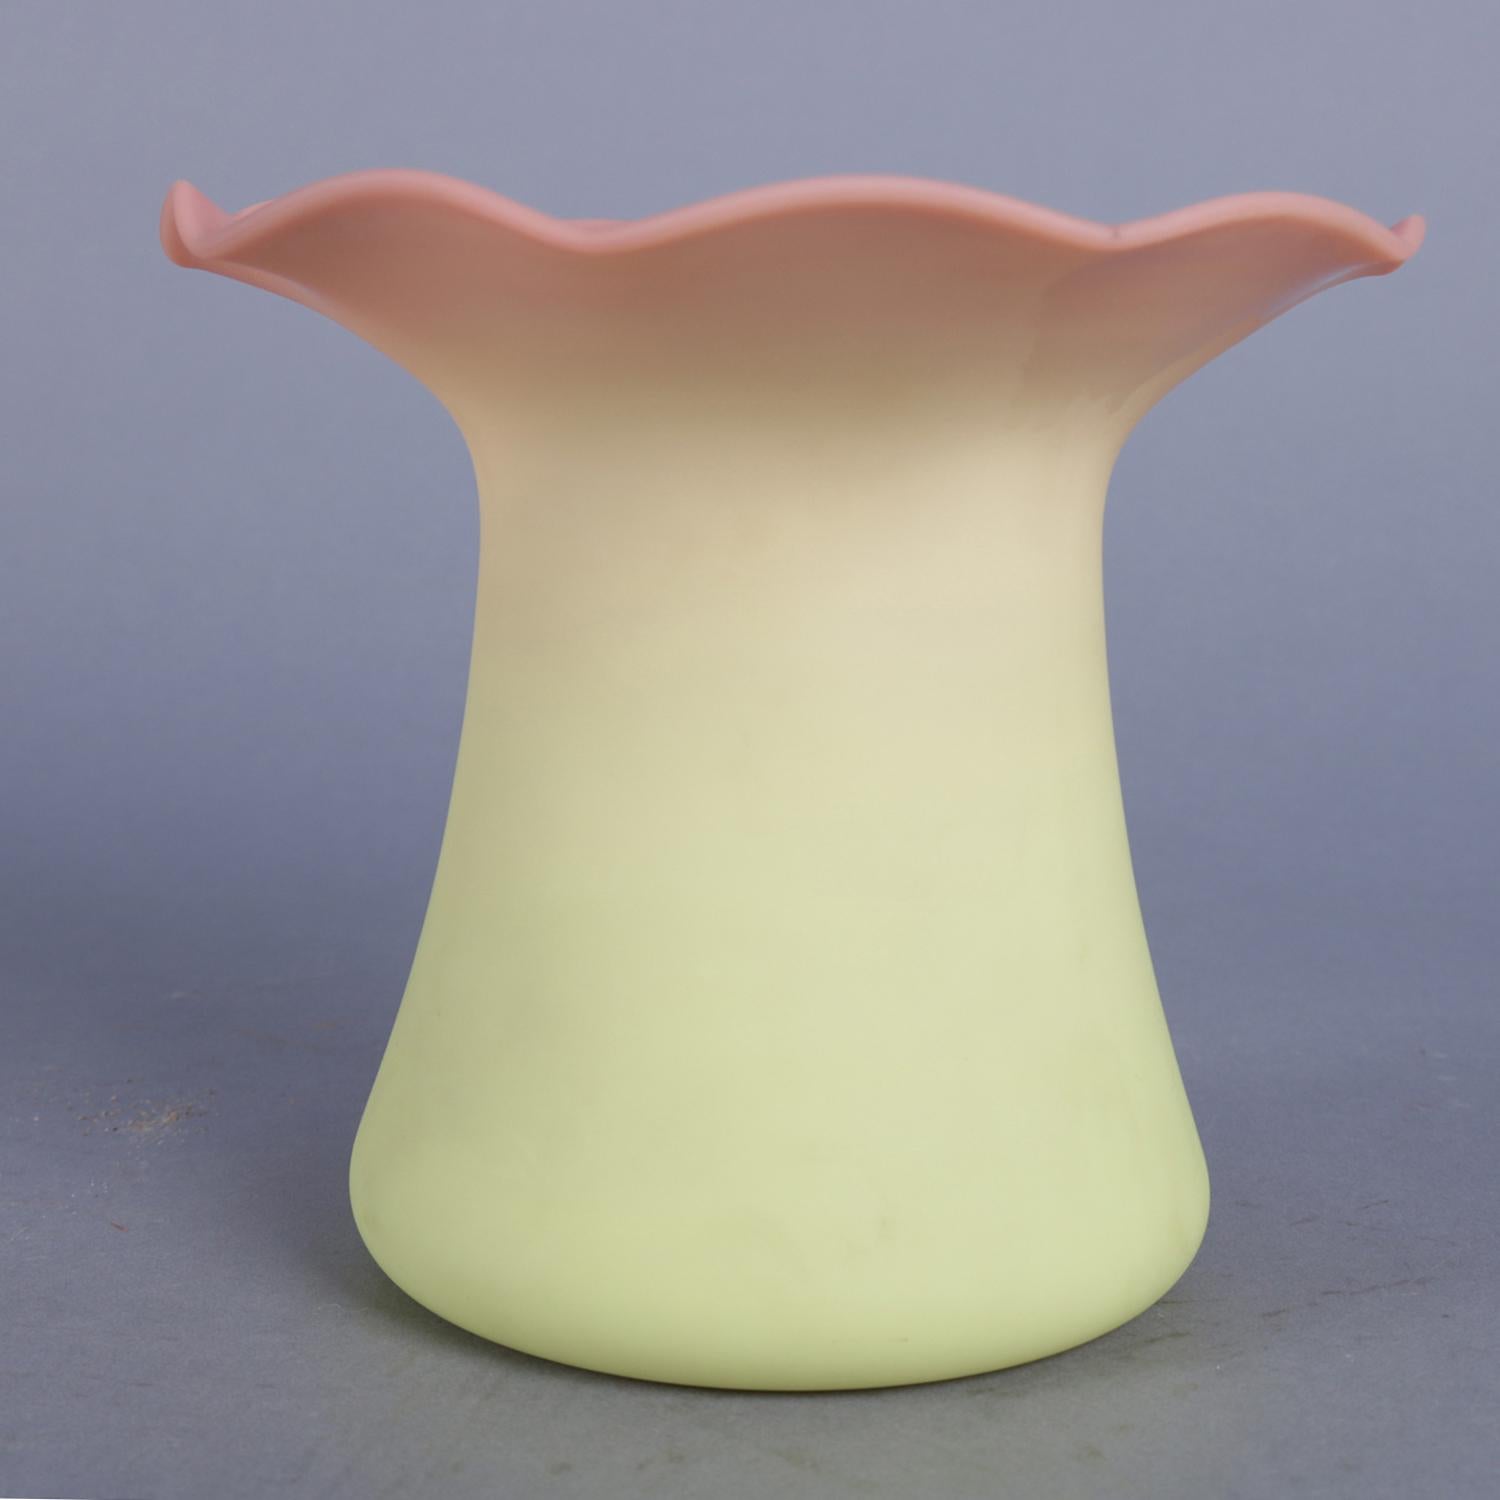 Antique Mt Washington blown vase features peach blow glass in top hat from and having ruffled rim, circa 1890.

Measures: 6